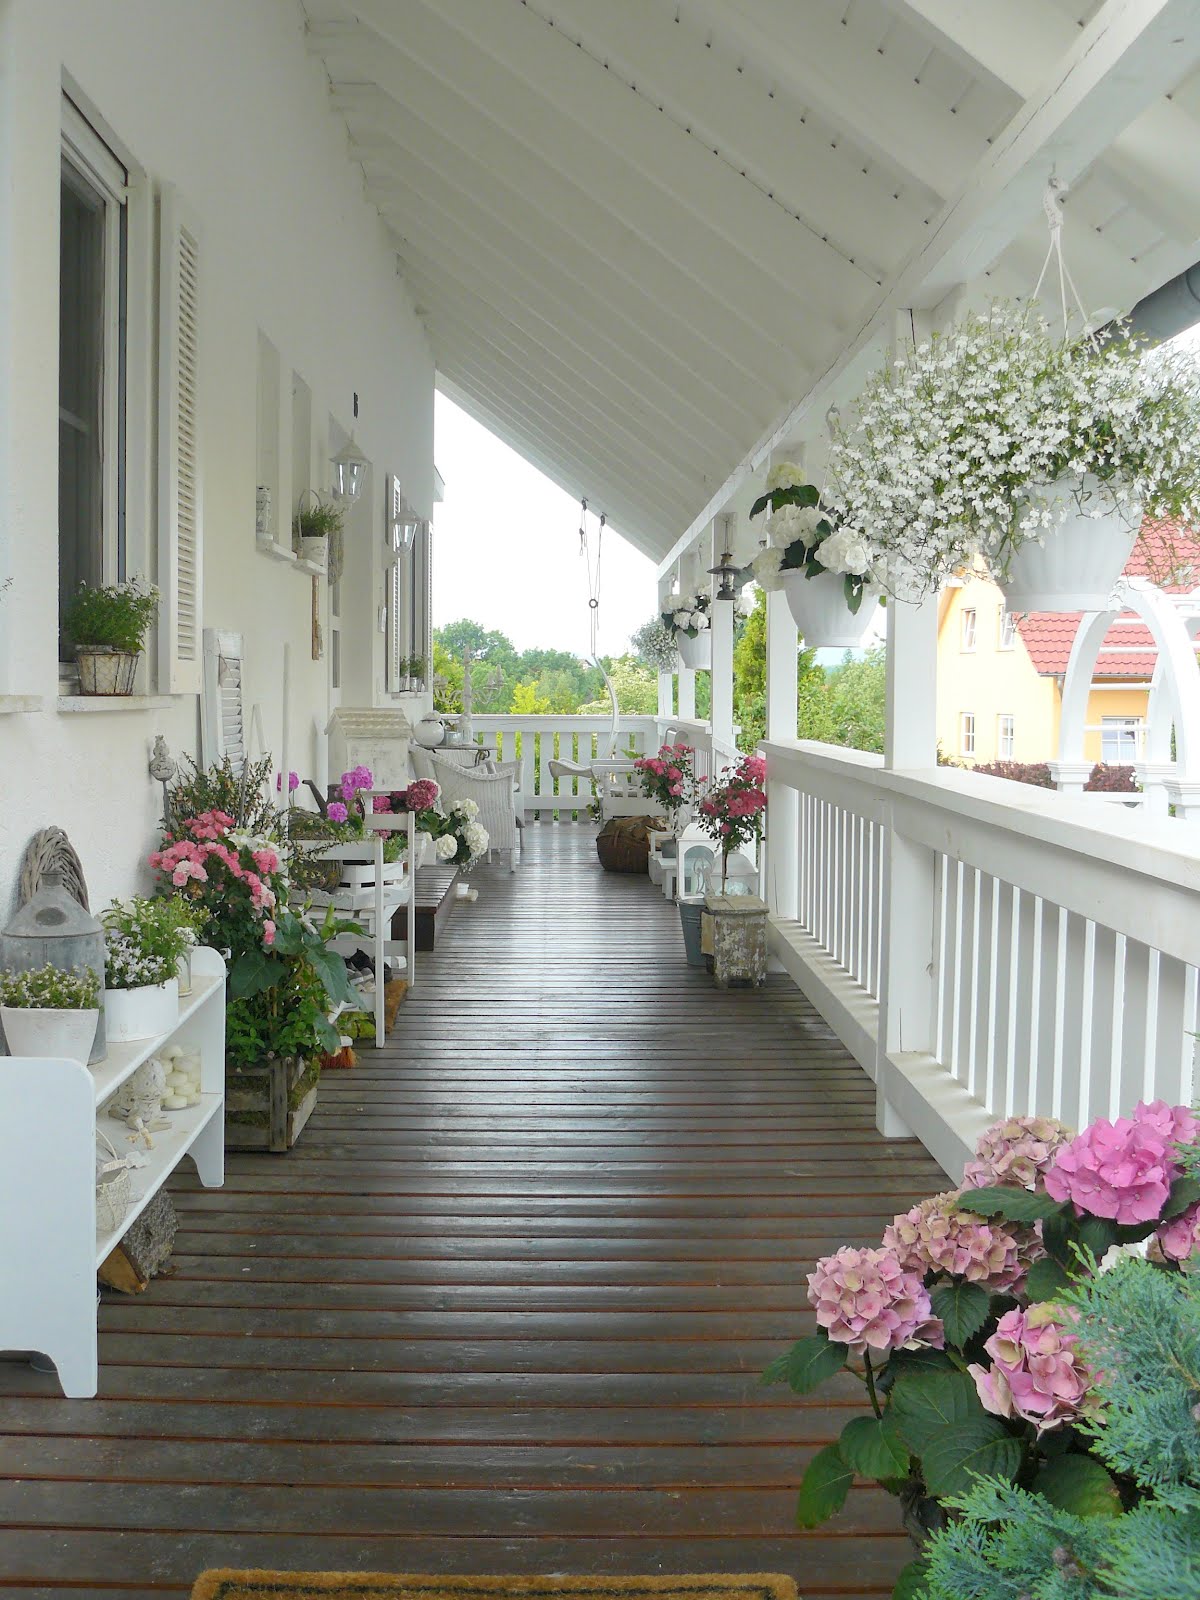 Outdoor Living Ideas - Shabby Chic Front Porch